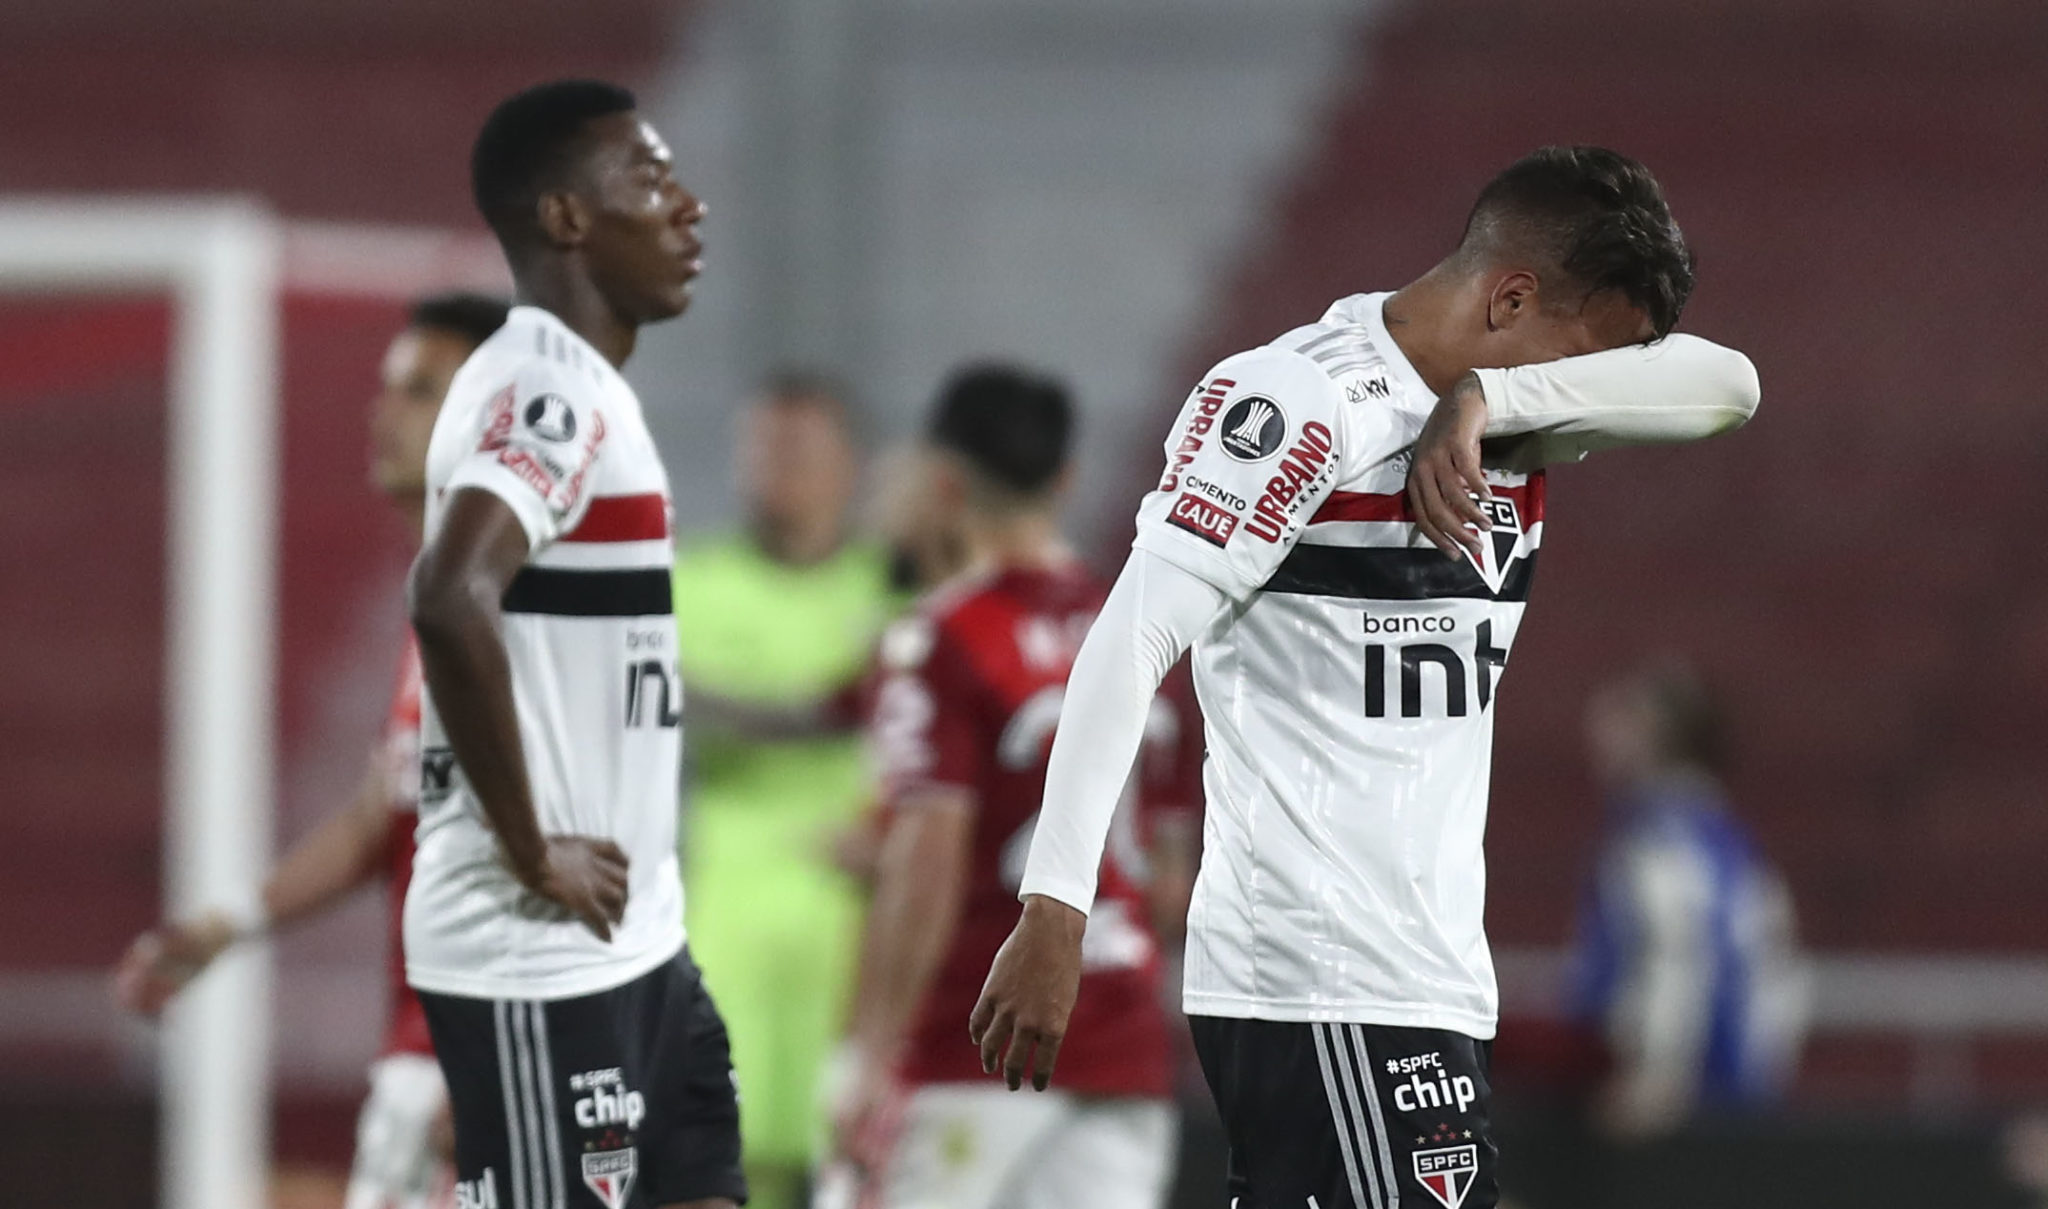 Brazil's Sao Paulo defender Diego Costa (R) reacts at the end of their closed-door Copa Libertadores group phase football match against Argentina's River Plate at the Libertadores de America (Monumental) Stadium in Avellaneda, Buenos Aires, Argentina, on September 30, 2020, amid the COVID-19 novel coronavirus pandemic. - River Plate won 2-1. (Photo by AGUSTIN MARCARIAN / POOL / AFP) (Photo by AGUSTIN MARCARIAN/POOL/AFP via Getty Images)